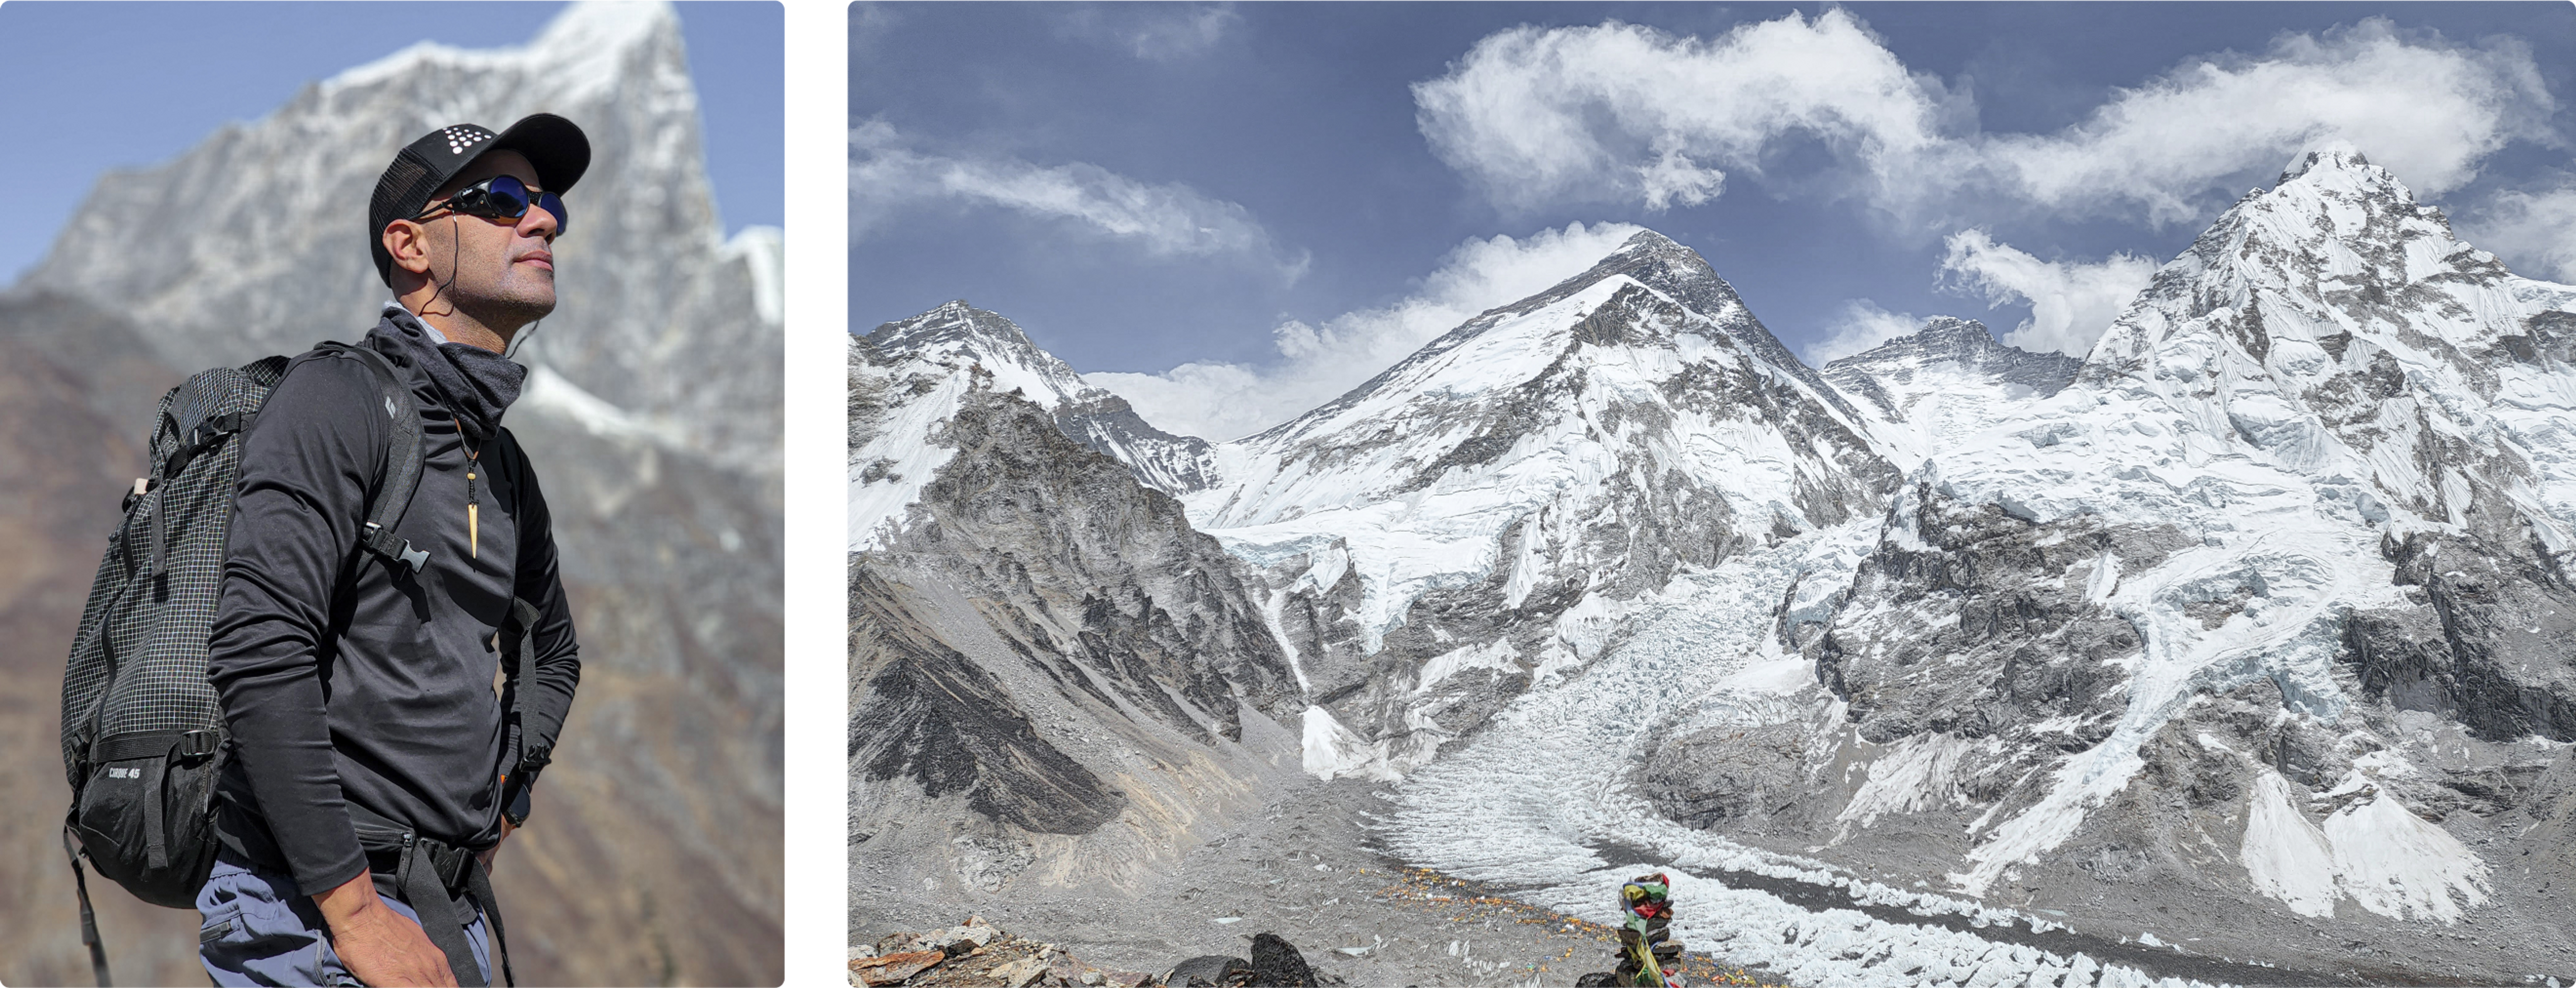 Portrait of Jatin Chaudhary alongside an image of Mount Everest and a glacier that leads to it